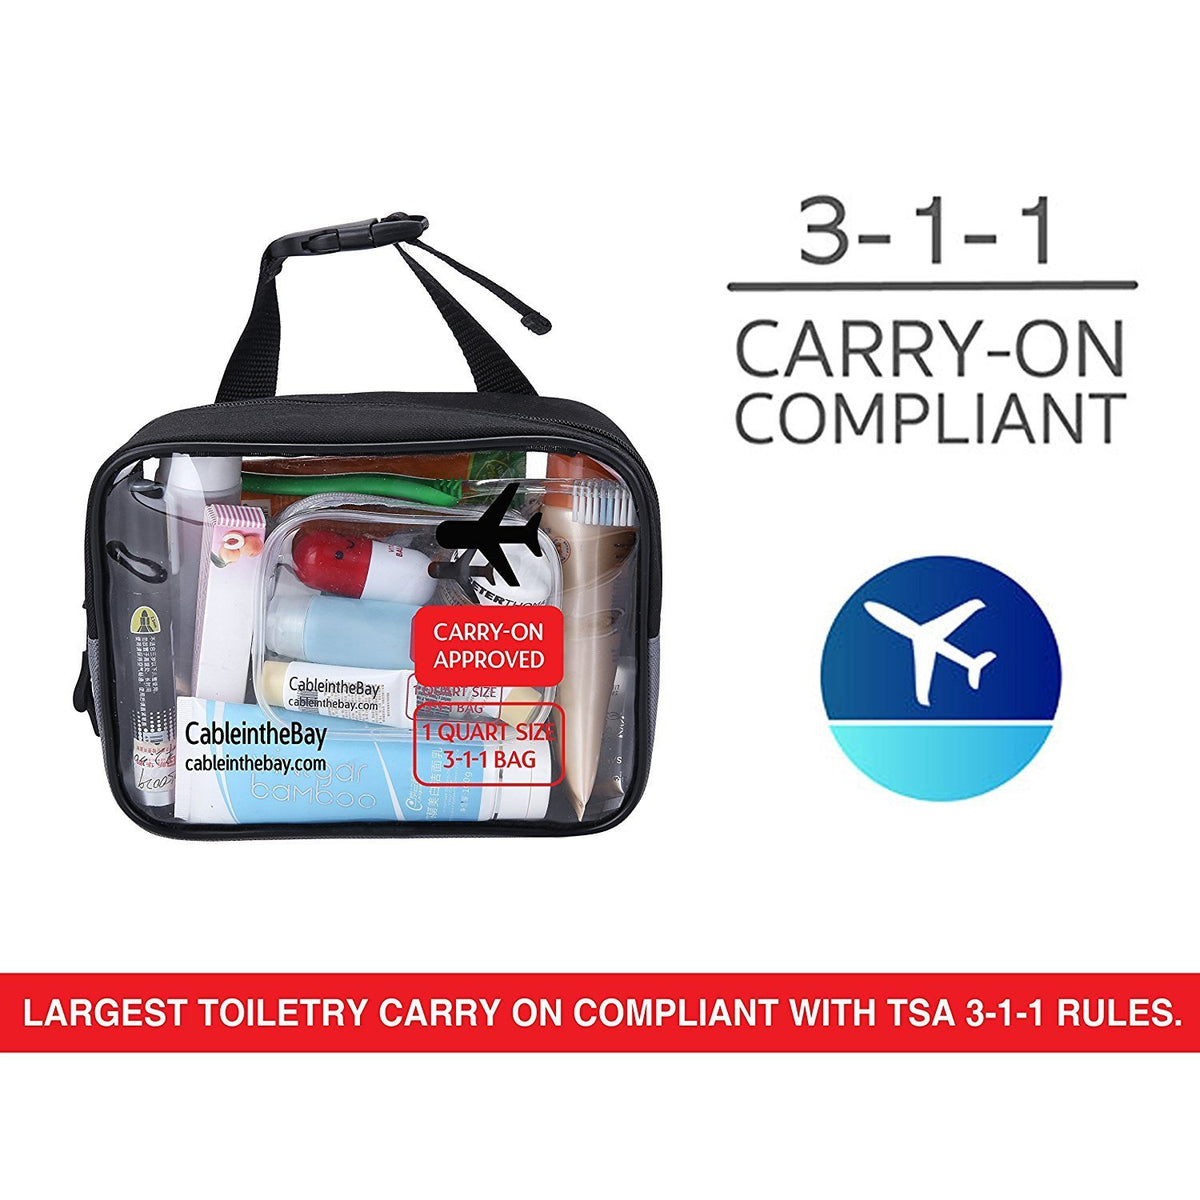 How Big is a TSA Approved Quart Size Bag For Carry on?